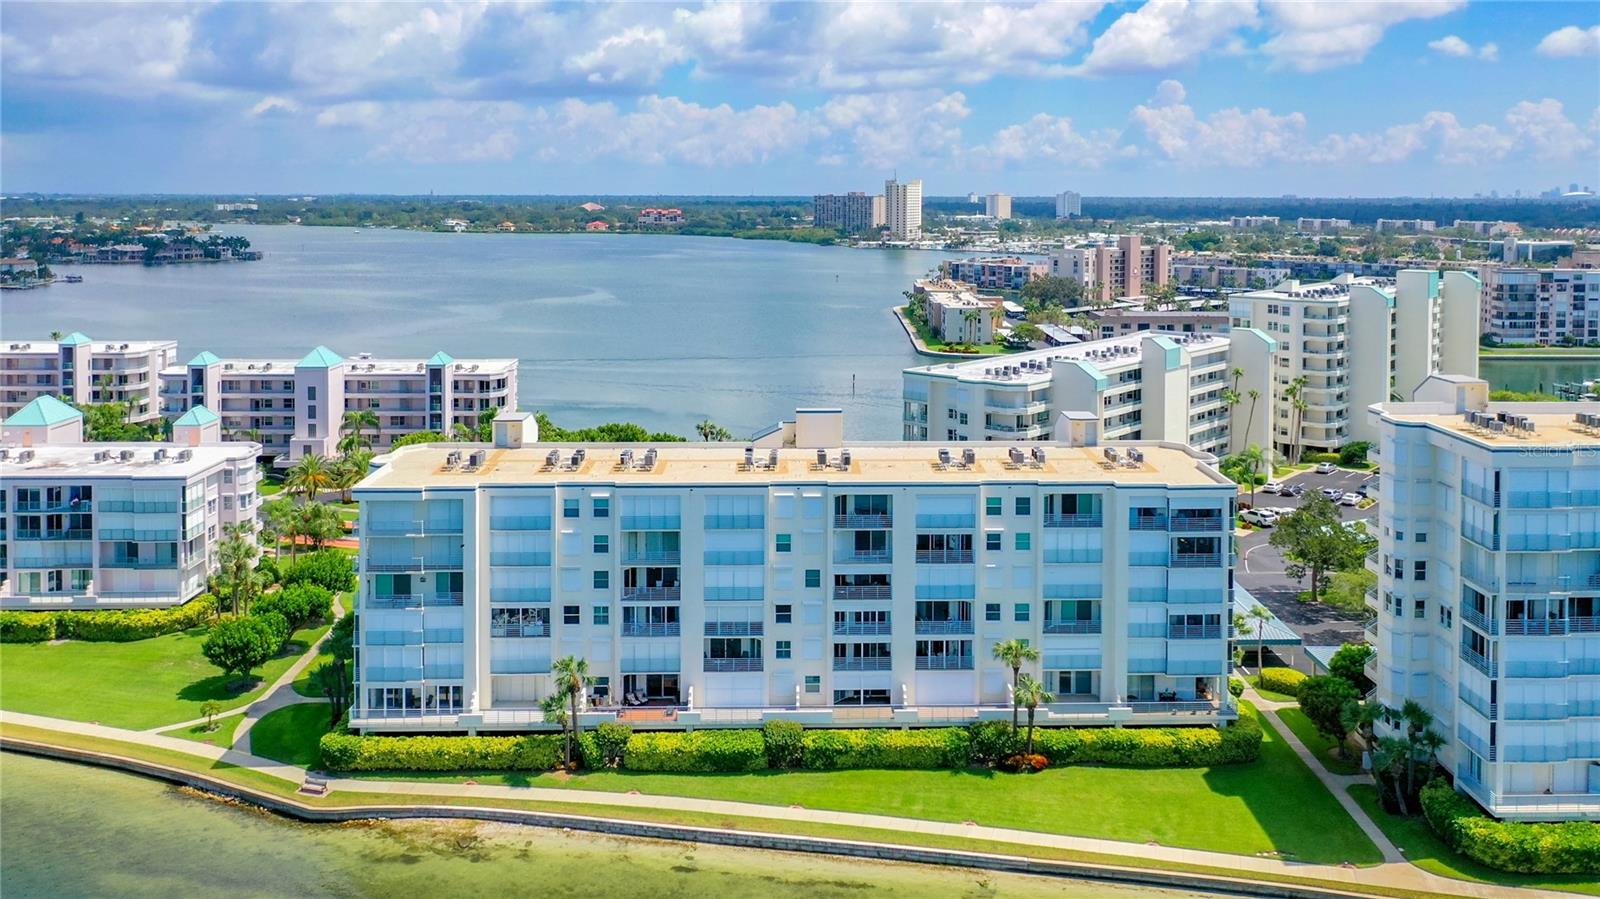 This is a closer aerial view showing the views of the back of the building and the water that you will view from the kitchen in your condo in the front